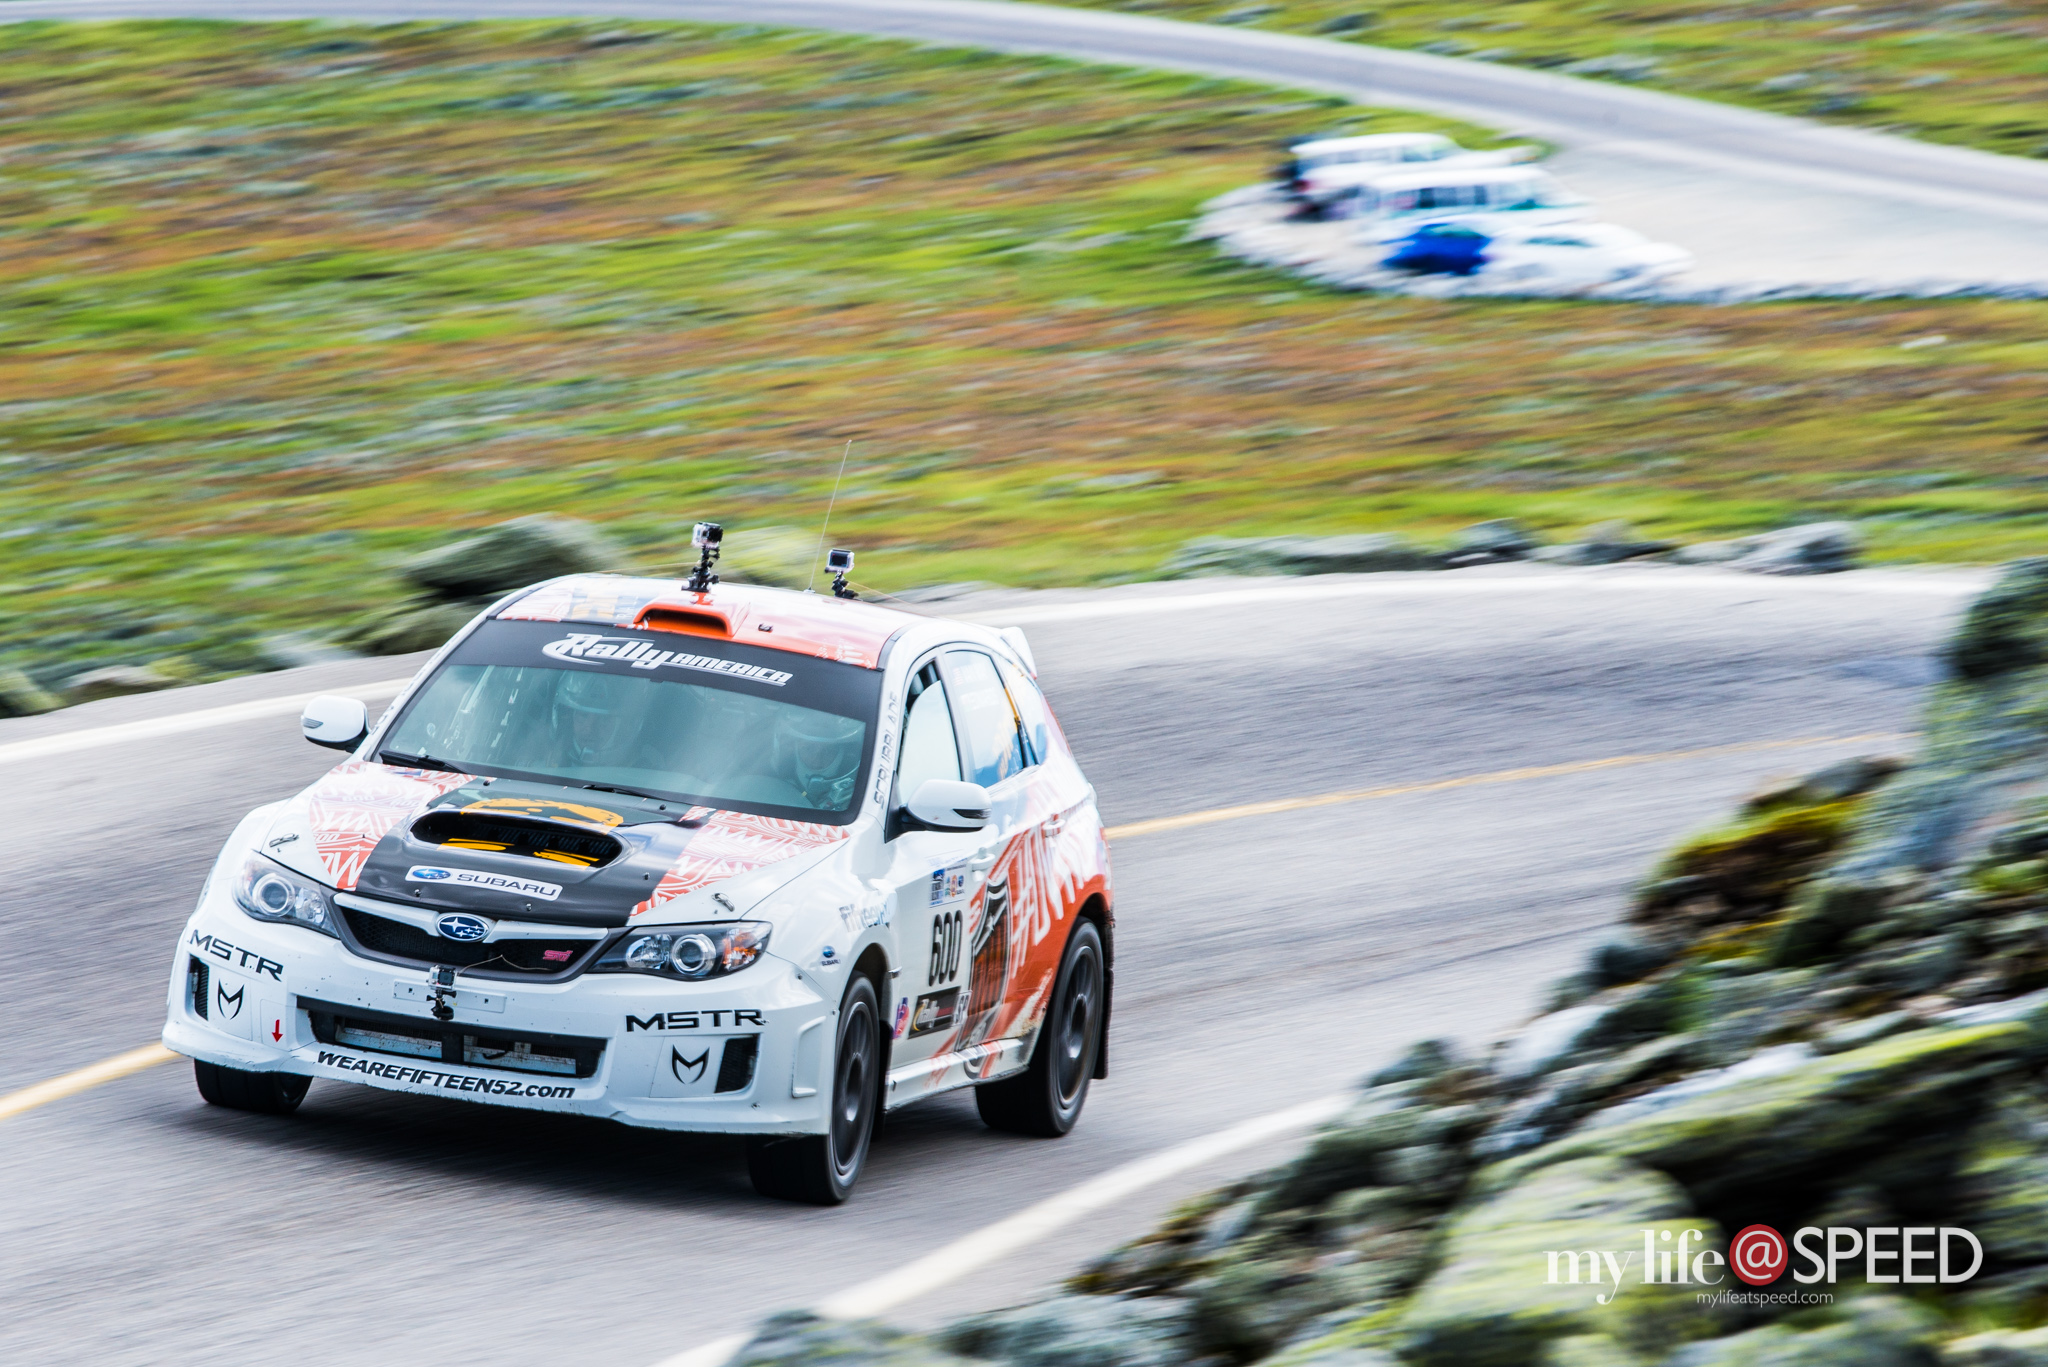 600, Dillon Van Way/Andrew Edwards in their 2013 Subaru STI just above Cow Pasture.